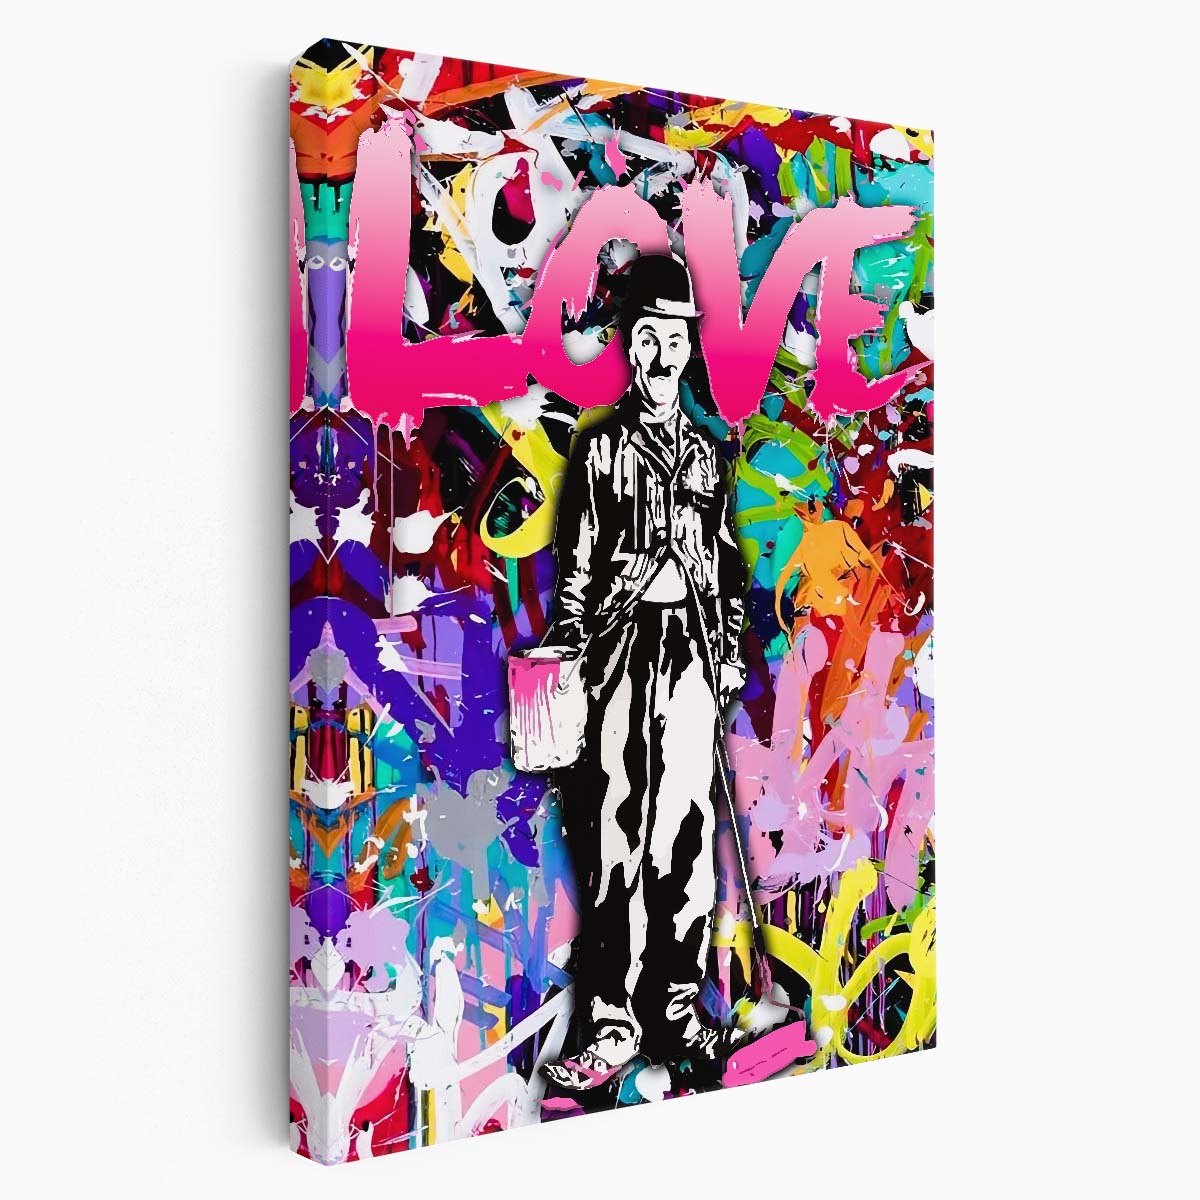 Banksy Love Chaplin Abstract Graffiti Wall Art by Luxuriance Designs. Made in USA.